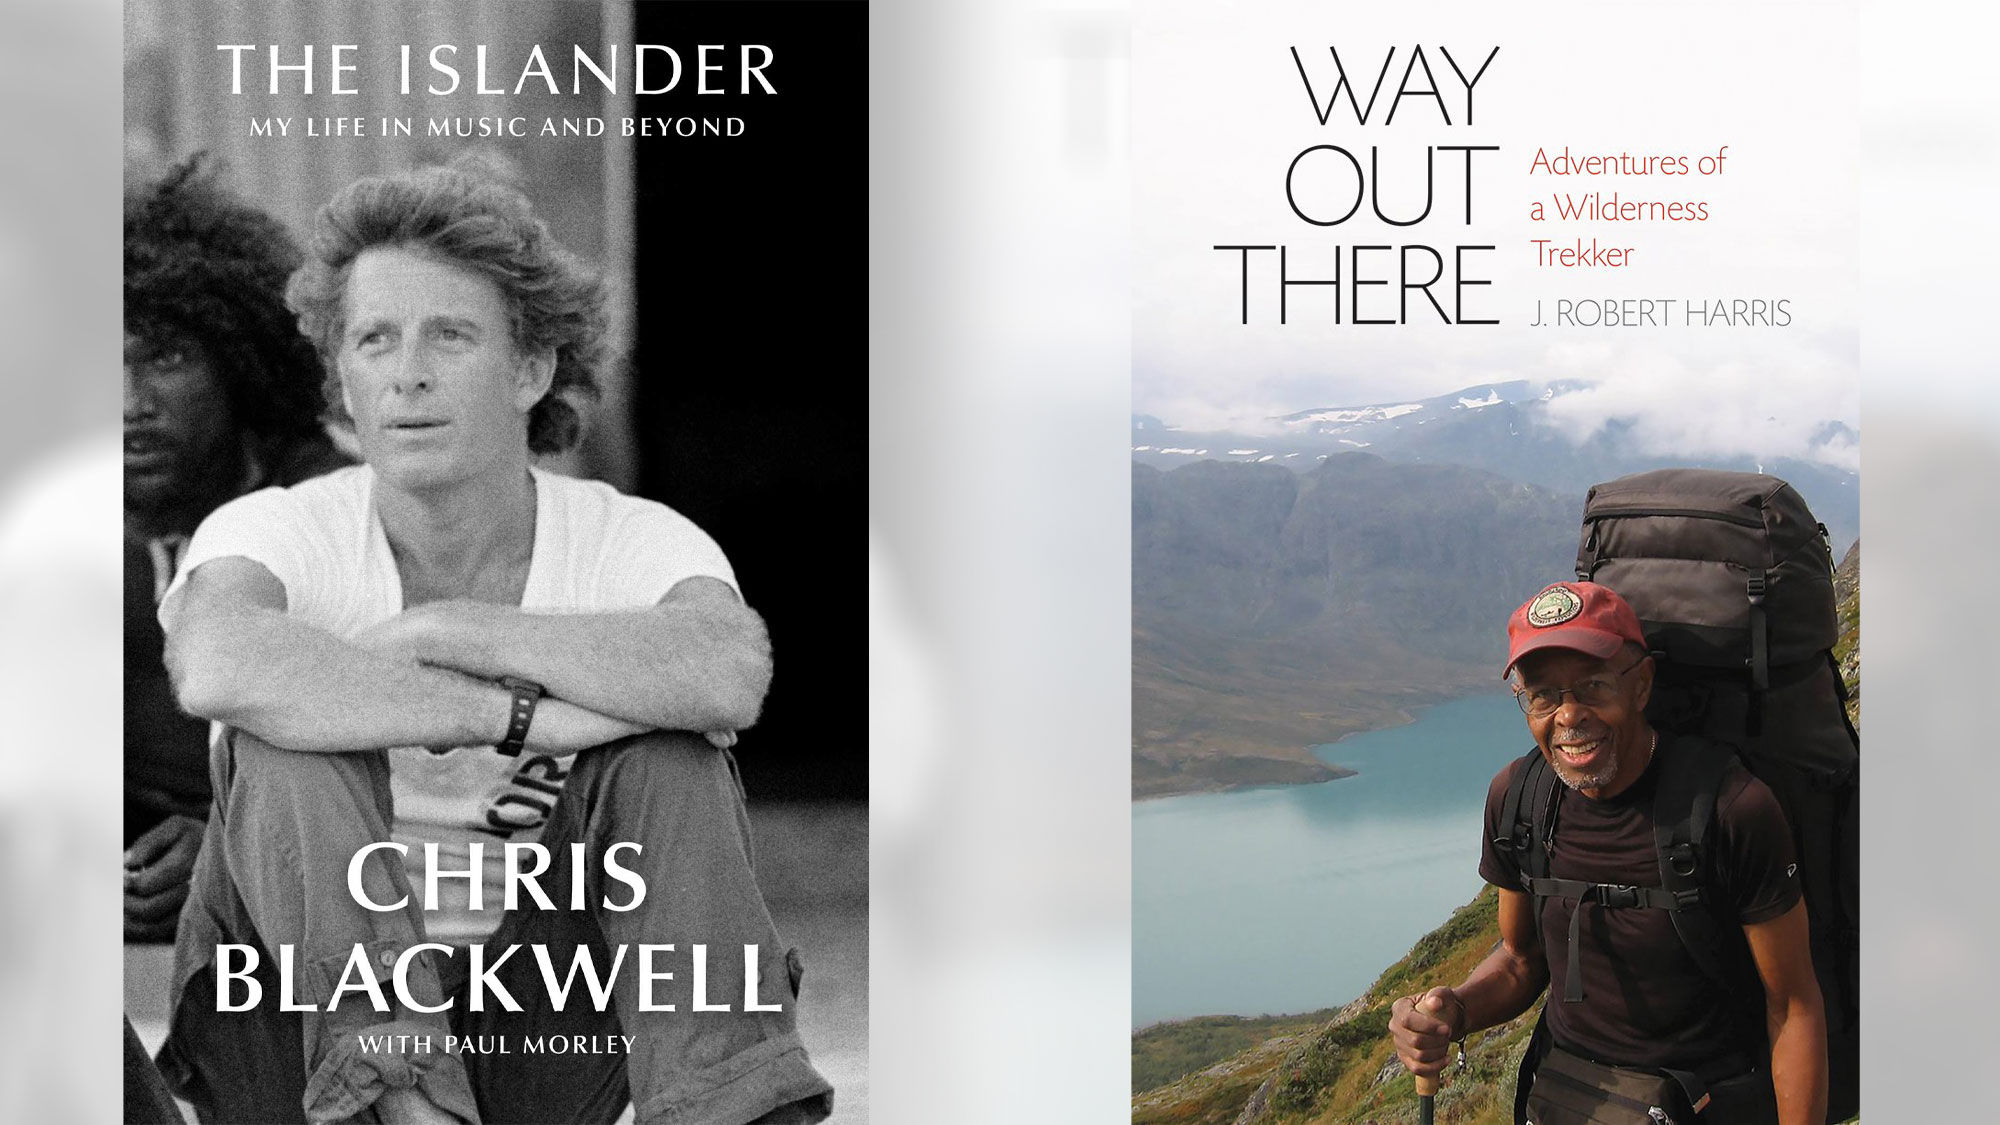 "The Islander, My Life in Music and Beyond," by Chris Blackwell with Paul Morley, and "Way Out There, Adventures of a Wilderness Trekker" by J. Robert Harris.